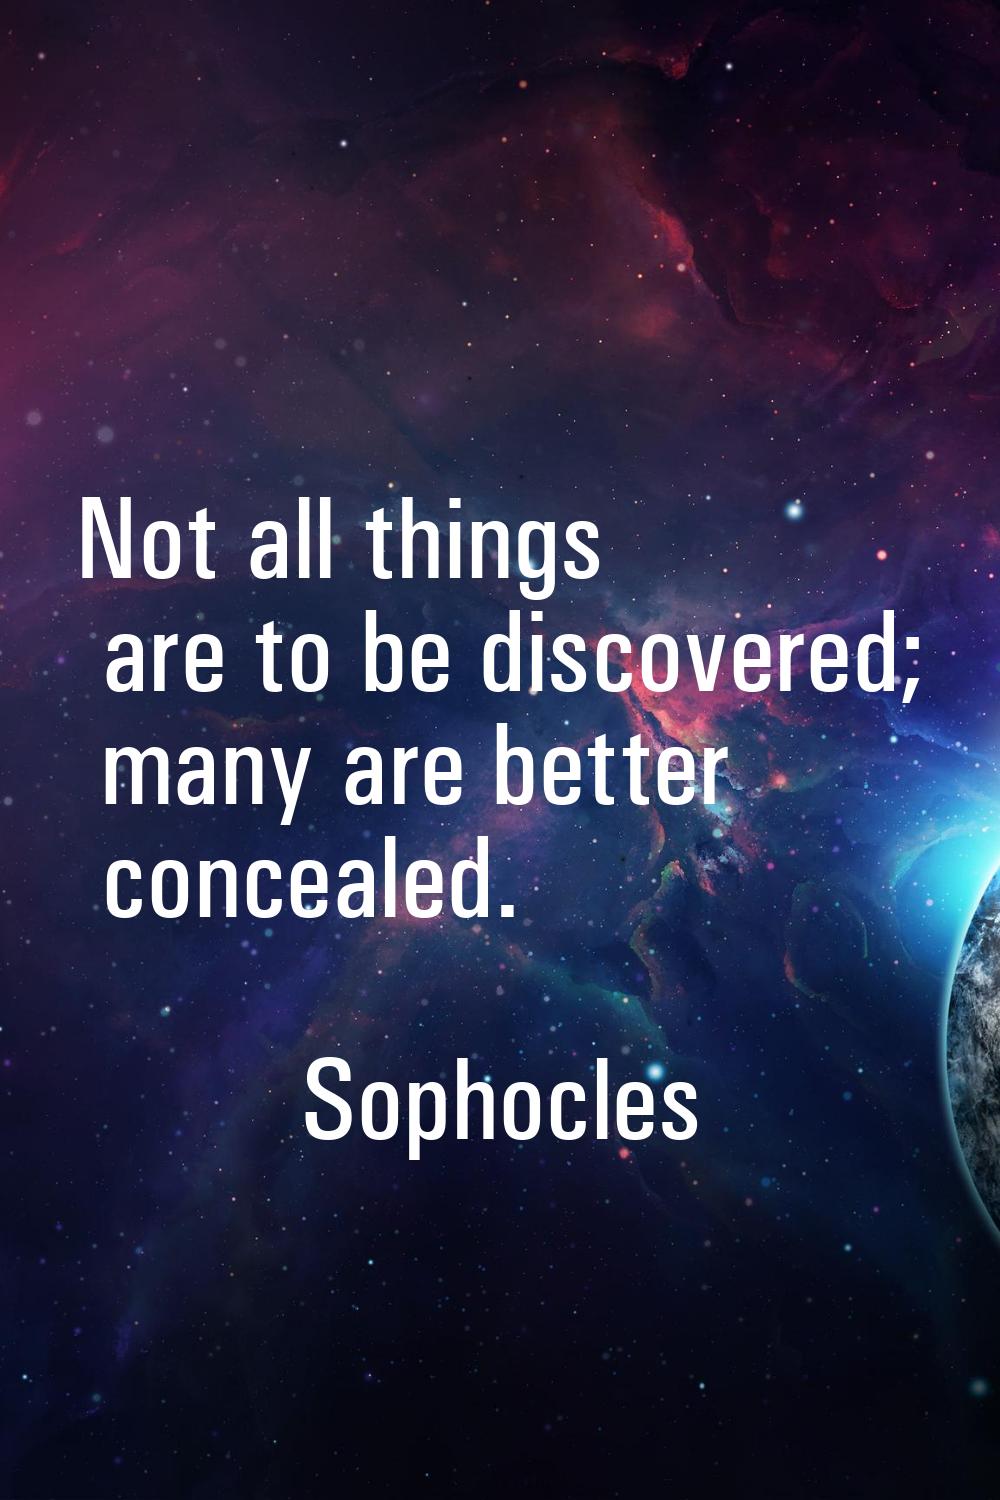 Not all things are to be discovered; many are better concealed.